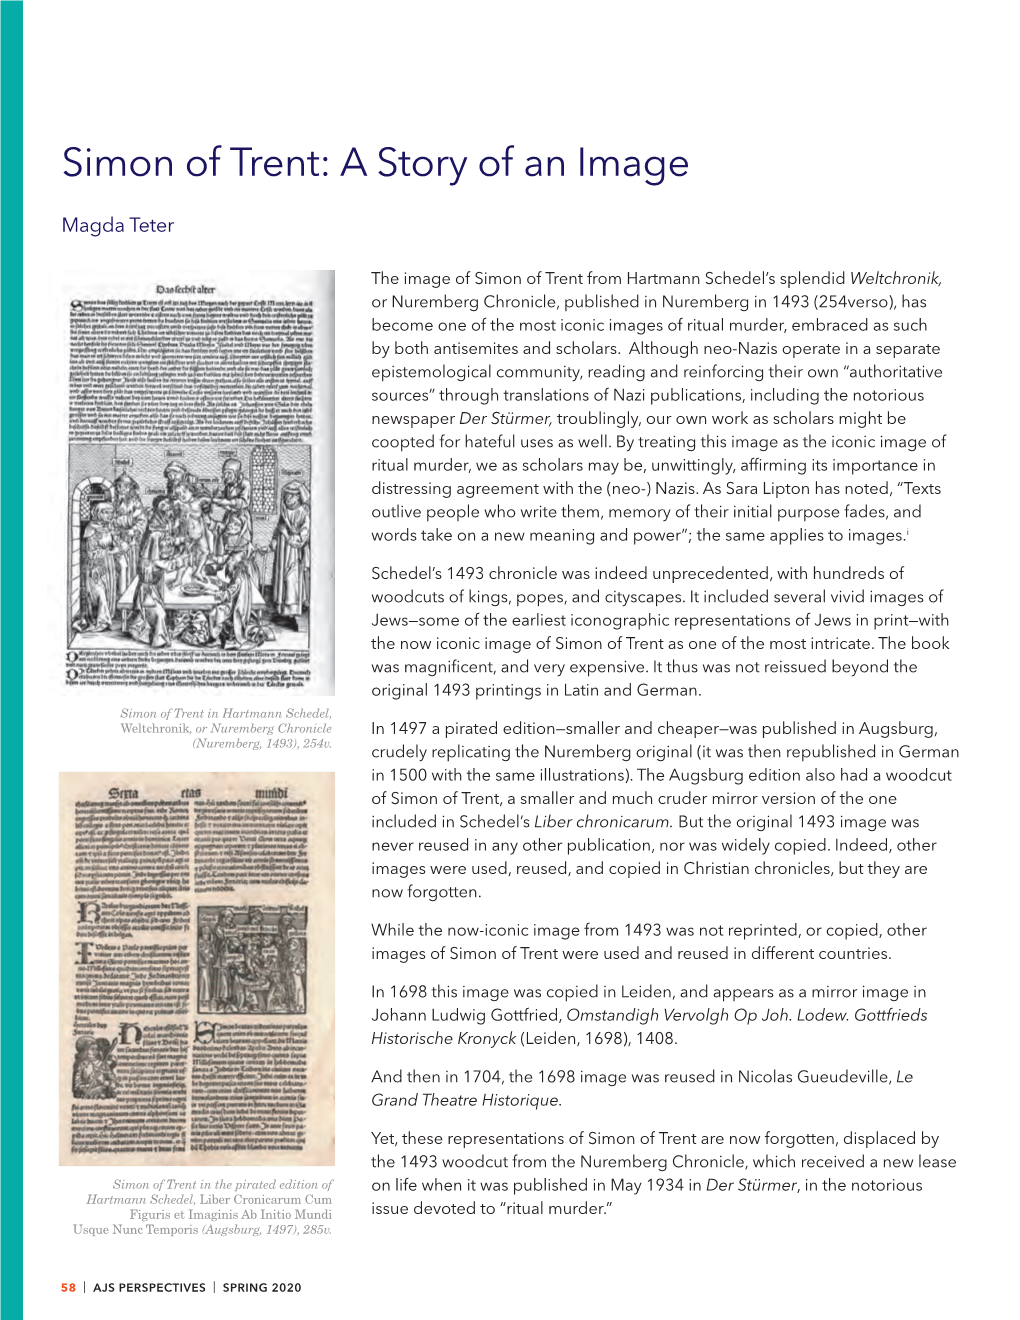 Simon of Trent: a Story of an Image